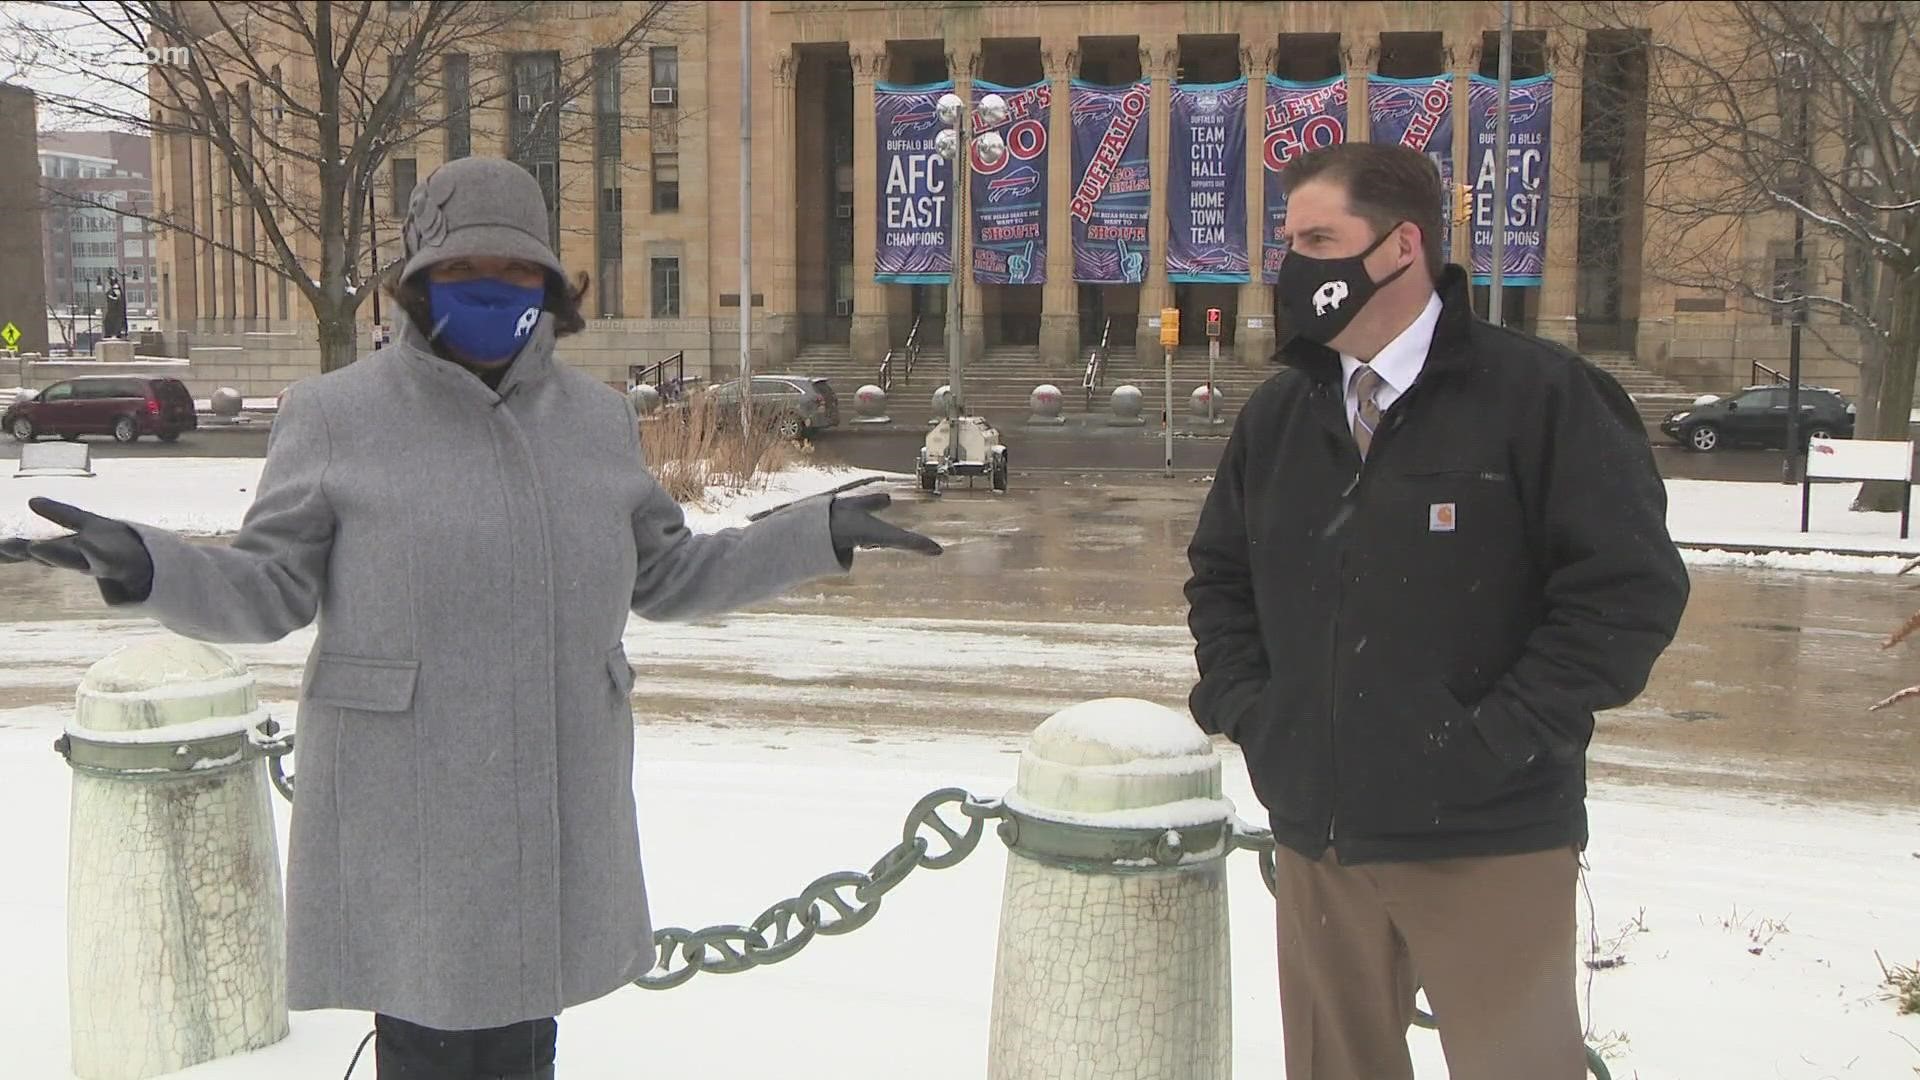 On this edition of commUNITY,  Claudine Ewing and Pete Gallivan focus on food, public art, music and the Buffalo Bills.